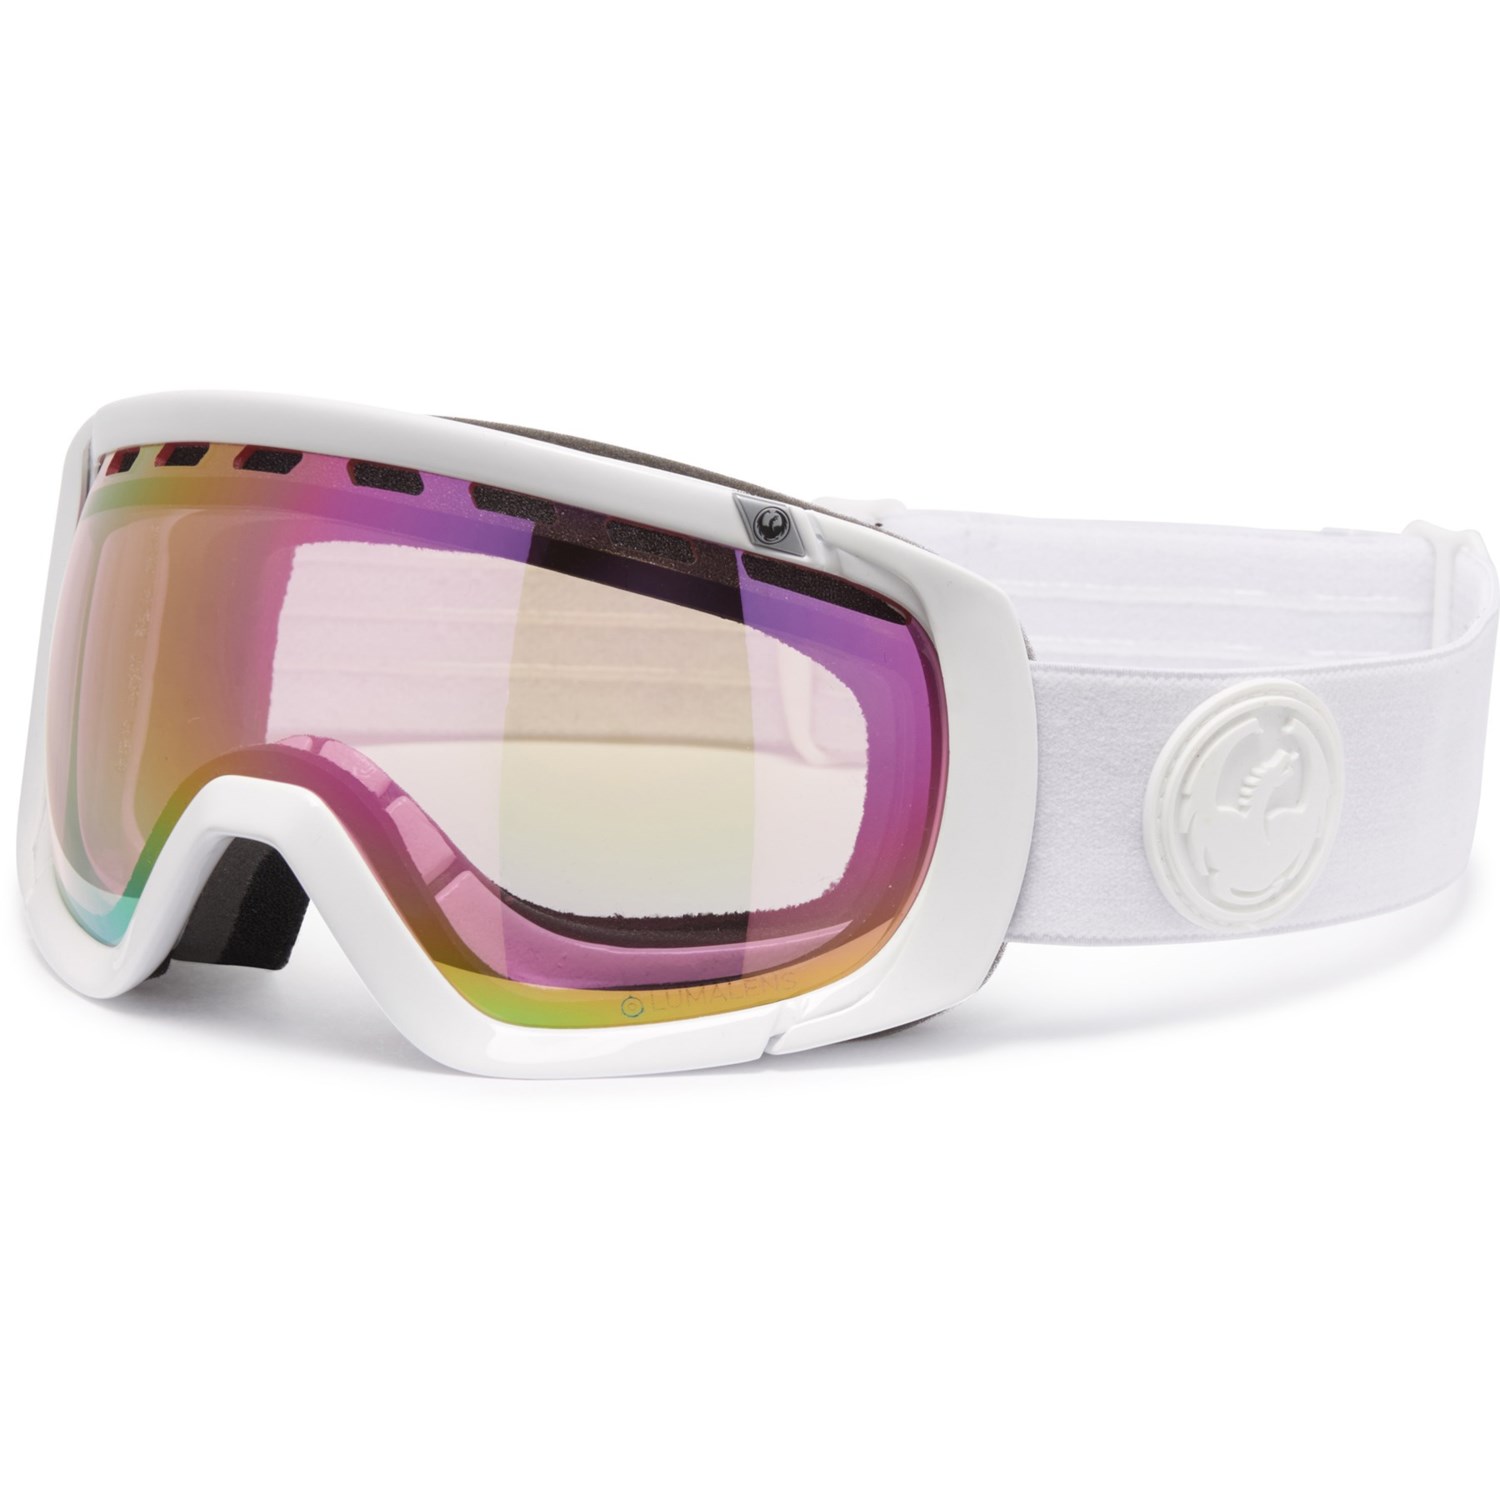 Dragon Rogue Goggles Clearance, 43% OFF | www.angloamericancentre.it